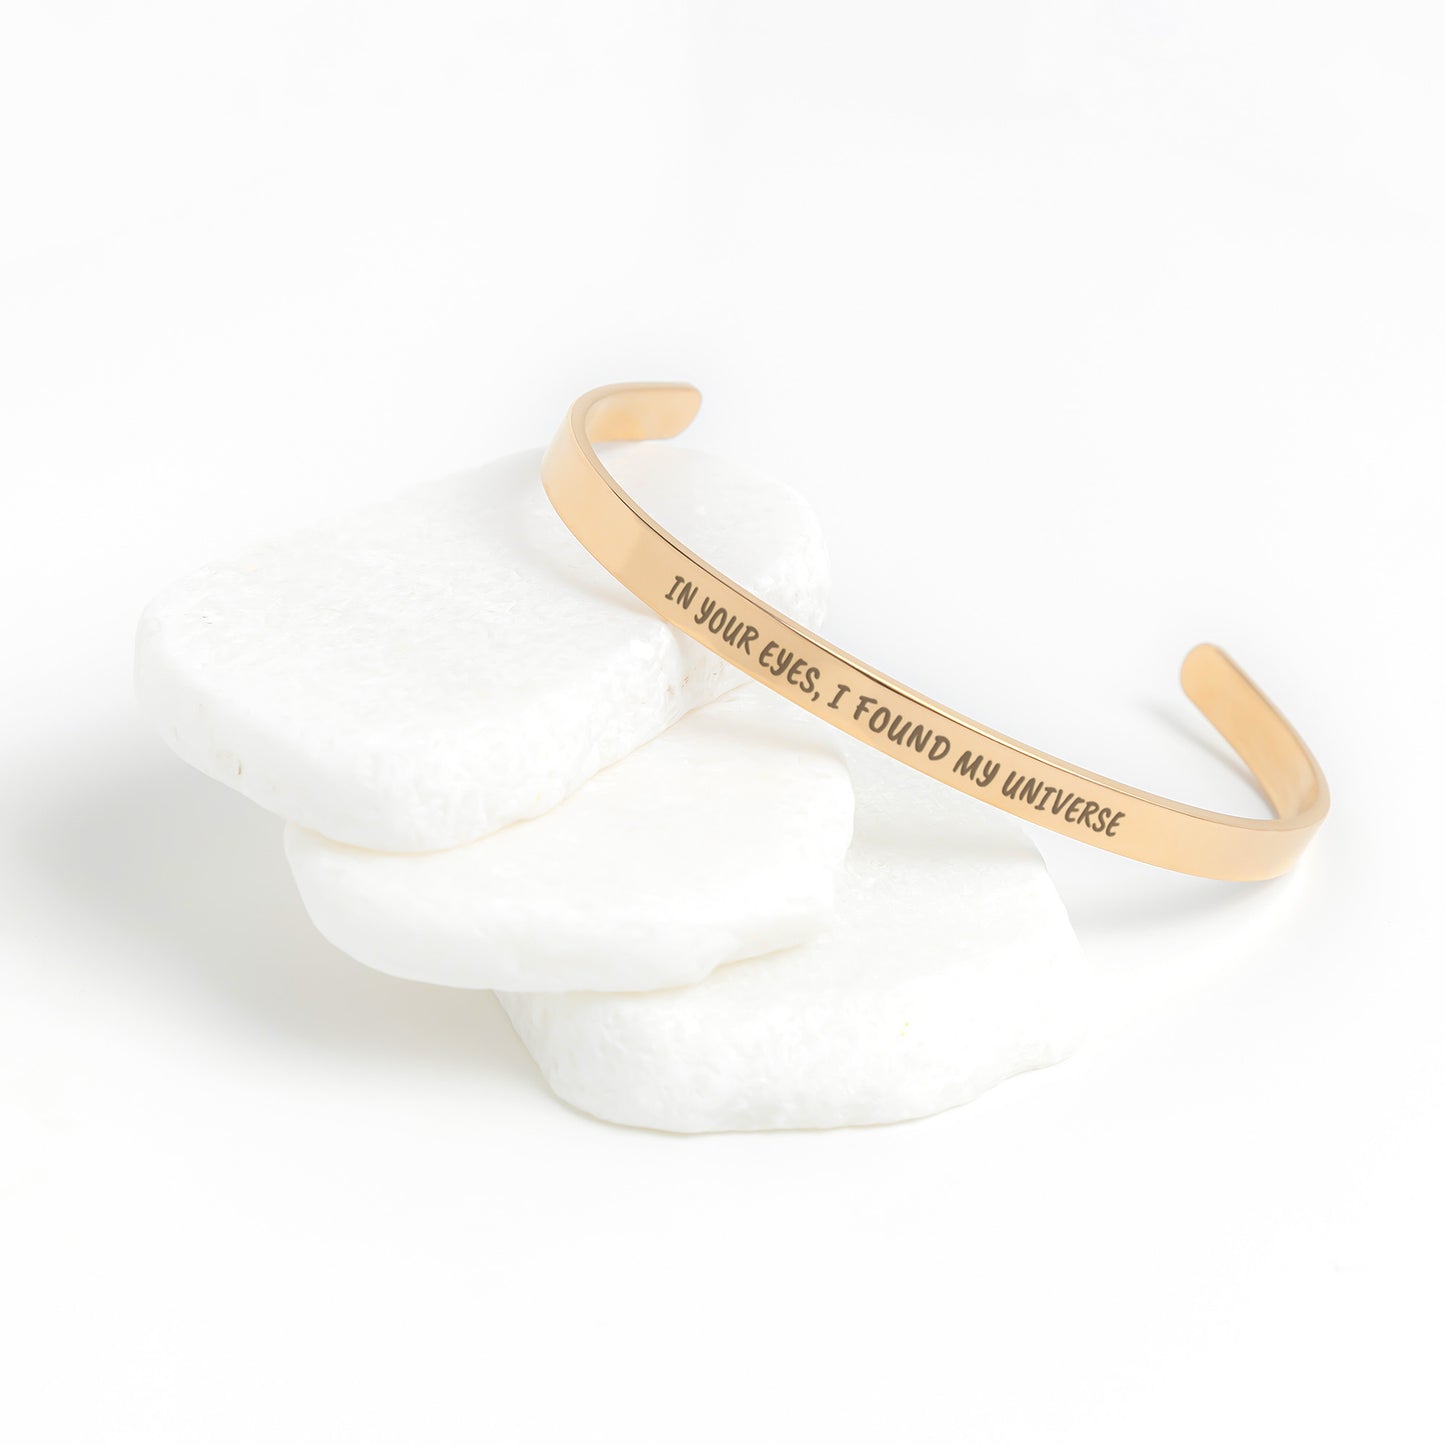 In Your Eyes, I Found My Universe Cuff Bracelet